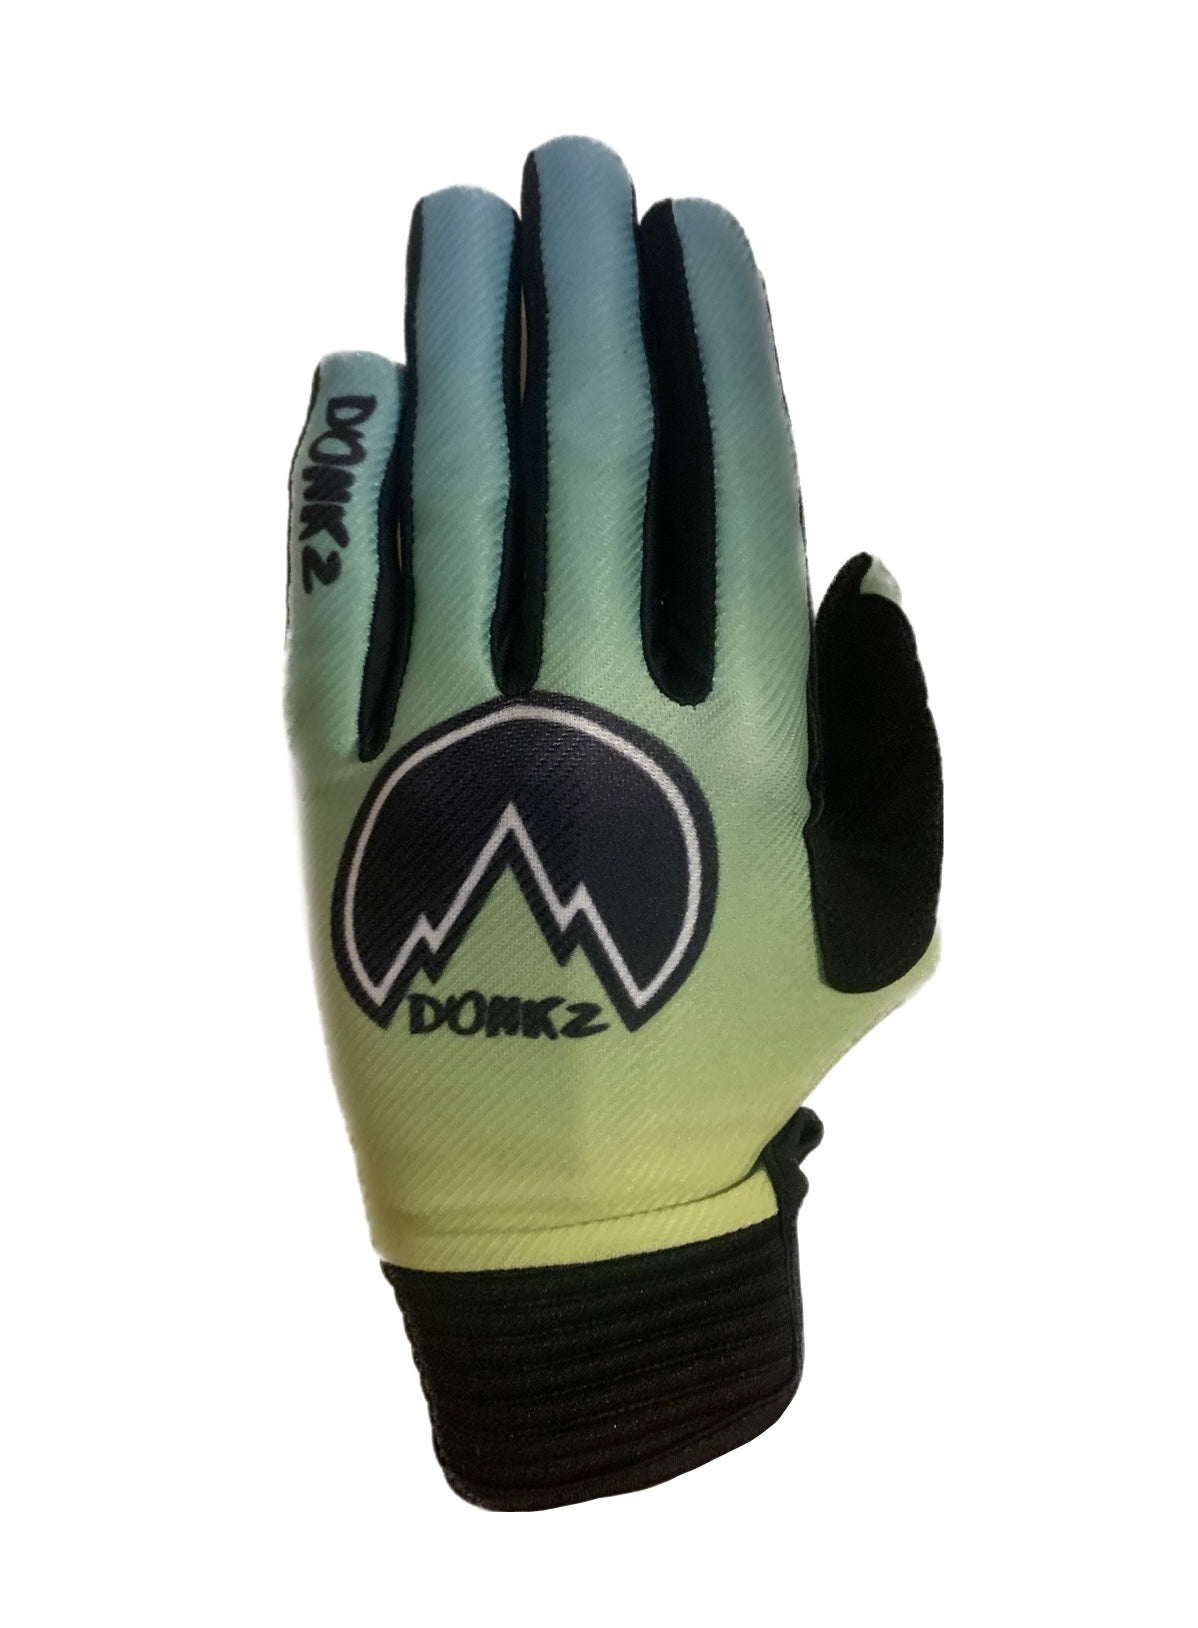 Donkz MX gloves. Blue to green gradient with Donkz logo